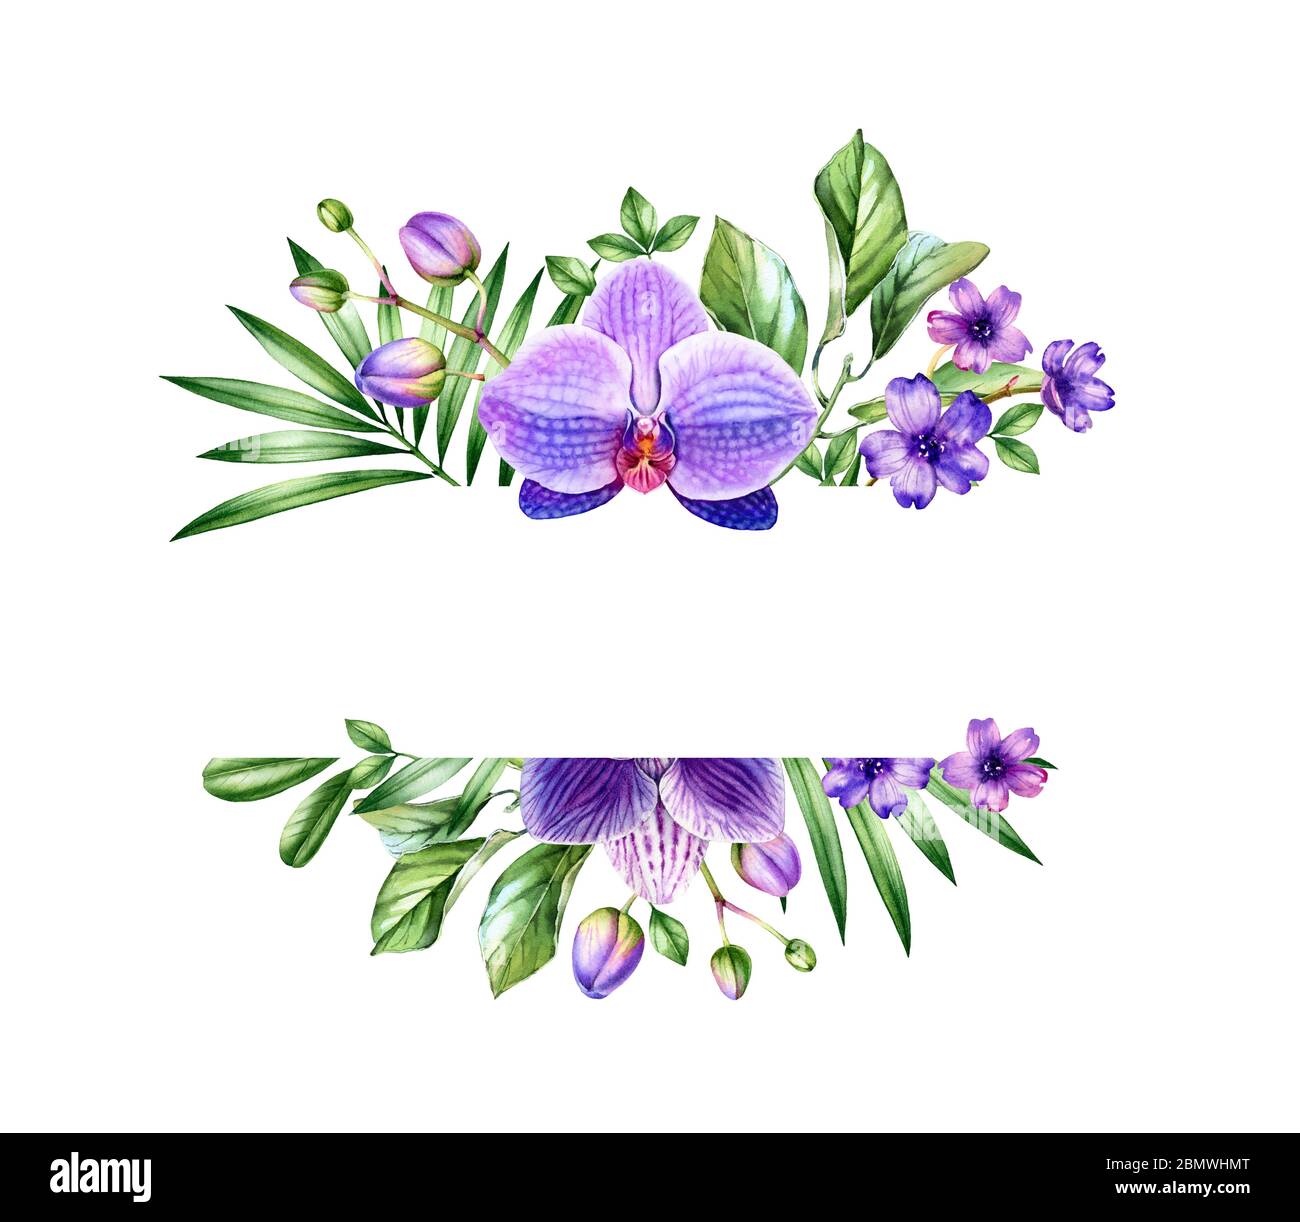 Watercolor floral banner. Horizontal frame with place for text. Big purple orchid flower and palm leaves. Hand painted tropical background for logo Stock Photo